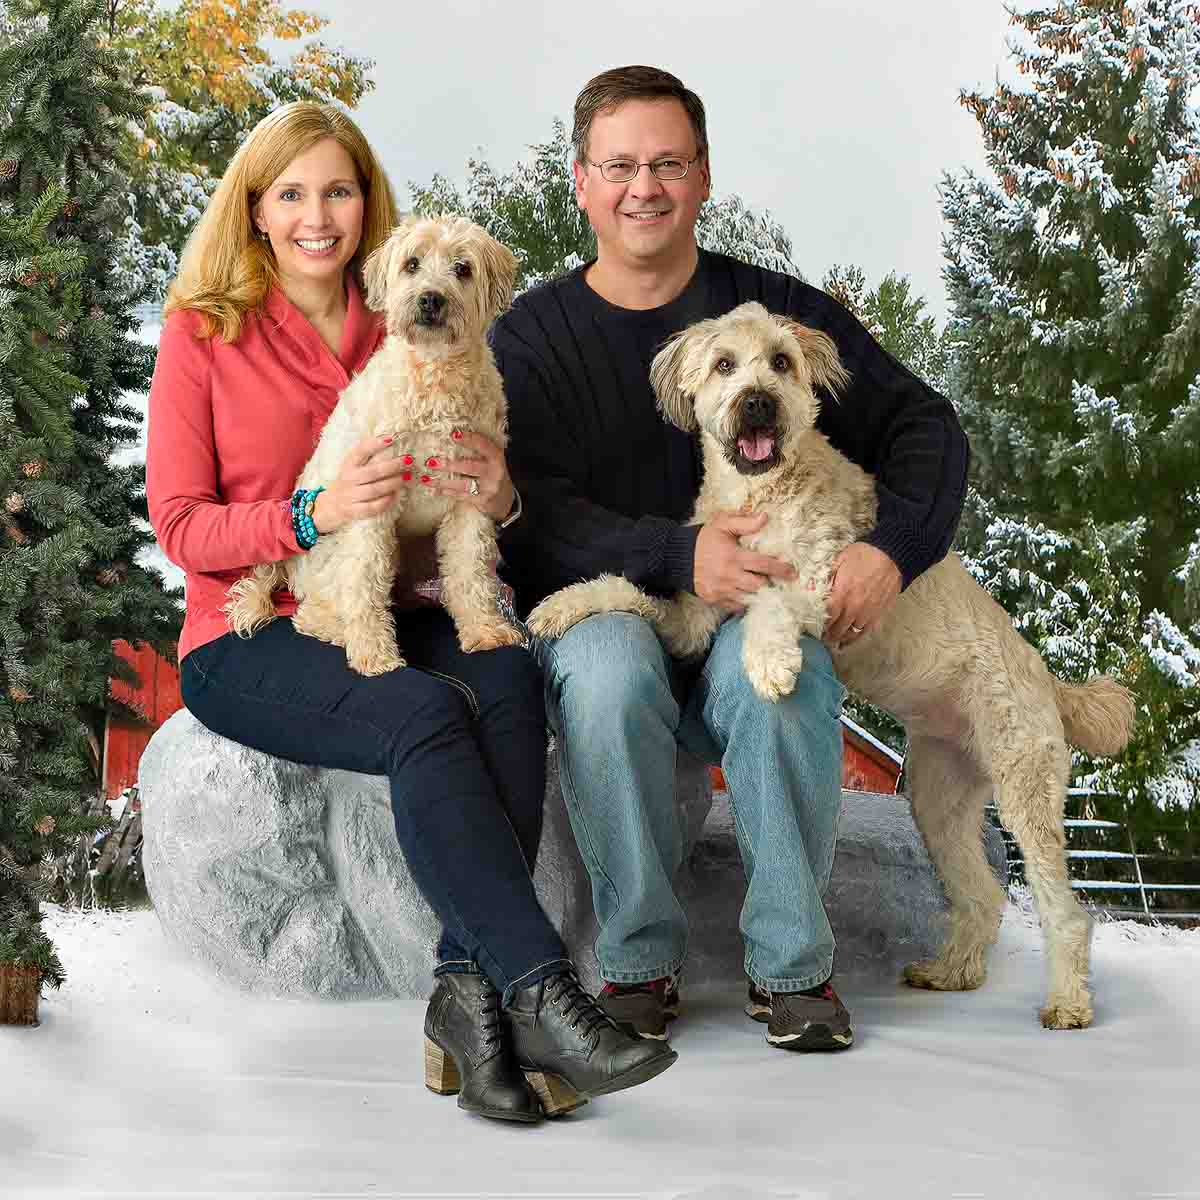 A man and woman sitting on top of a bench with two dogs.